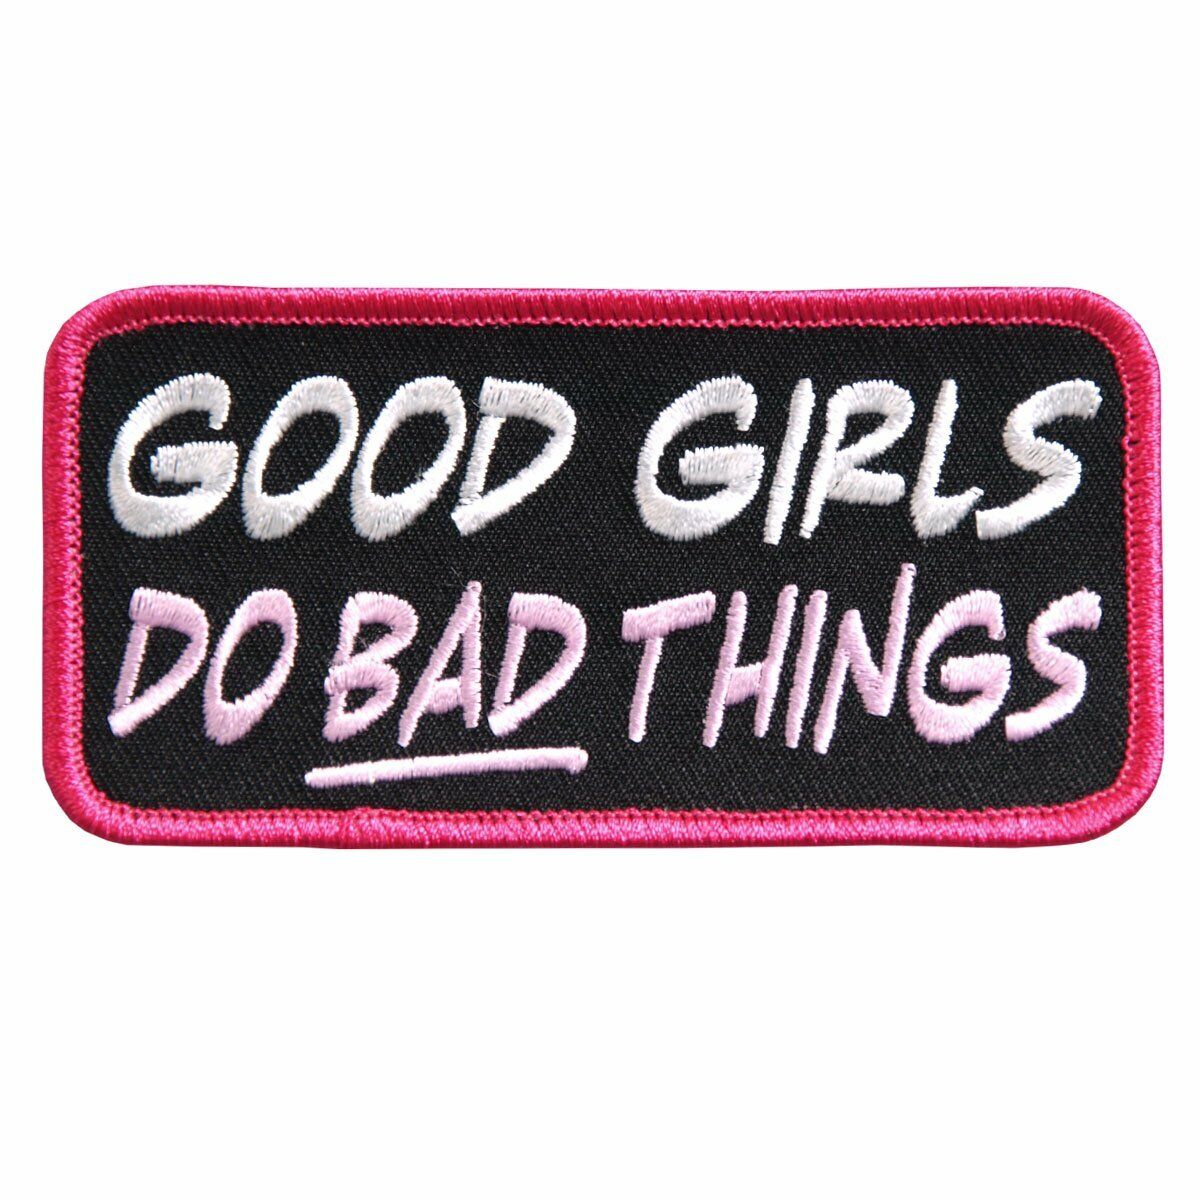 GOOD GIRLS DO BAD THINGS  PATCH [IRON ON SEW ON - 4.0 X 2.0]